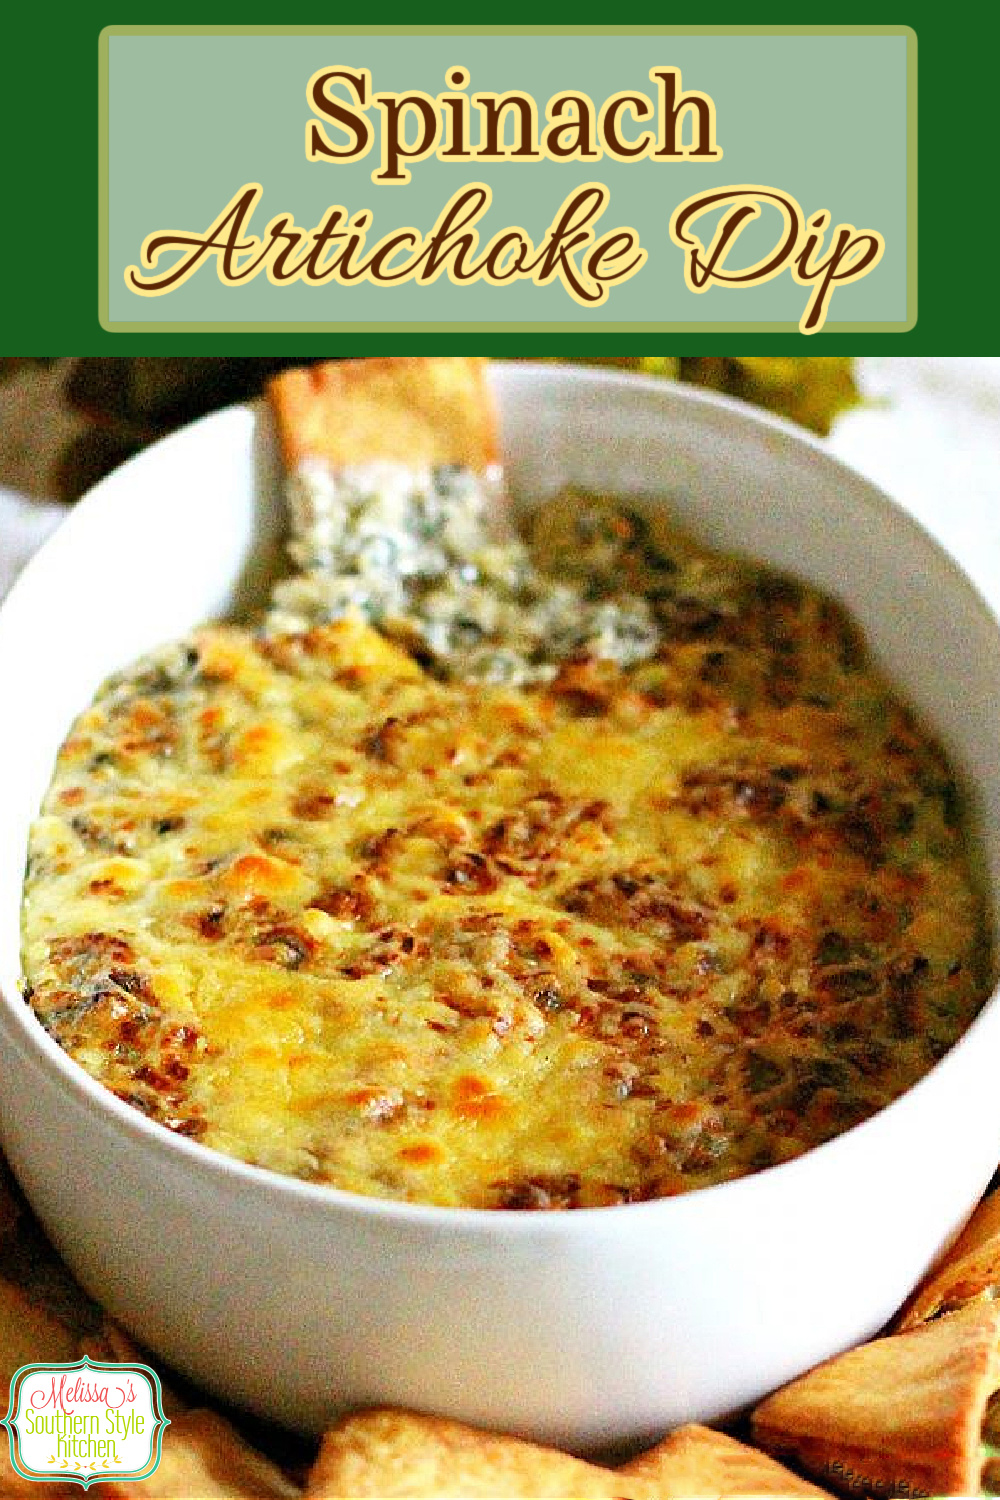 Enjoy this gooey Italian Spinach Artichoke Dip for entertaining, as a holiday starter or game day snacks #spinachartichokedip #spinachdip #artichokedip #diprecipes #appetizers #easyrecipes #bakedspinachdip #southernfood #southernrecipes #Italian #snacks #footballfood